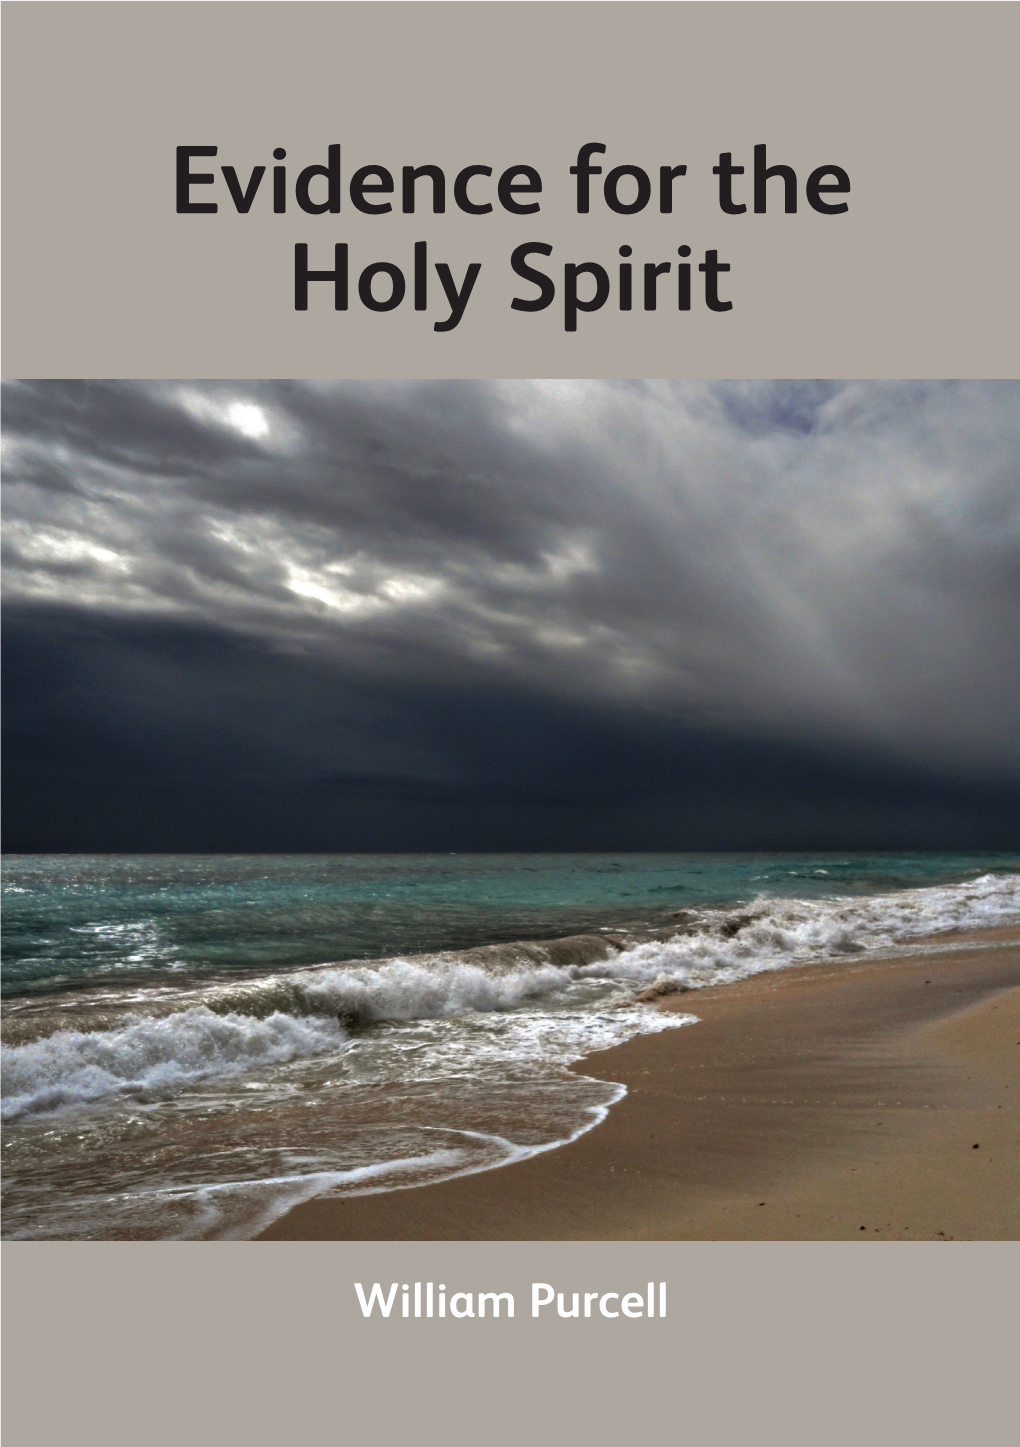 Evidence for the Holy Spirit by William Purcell